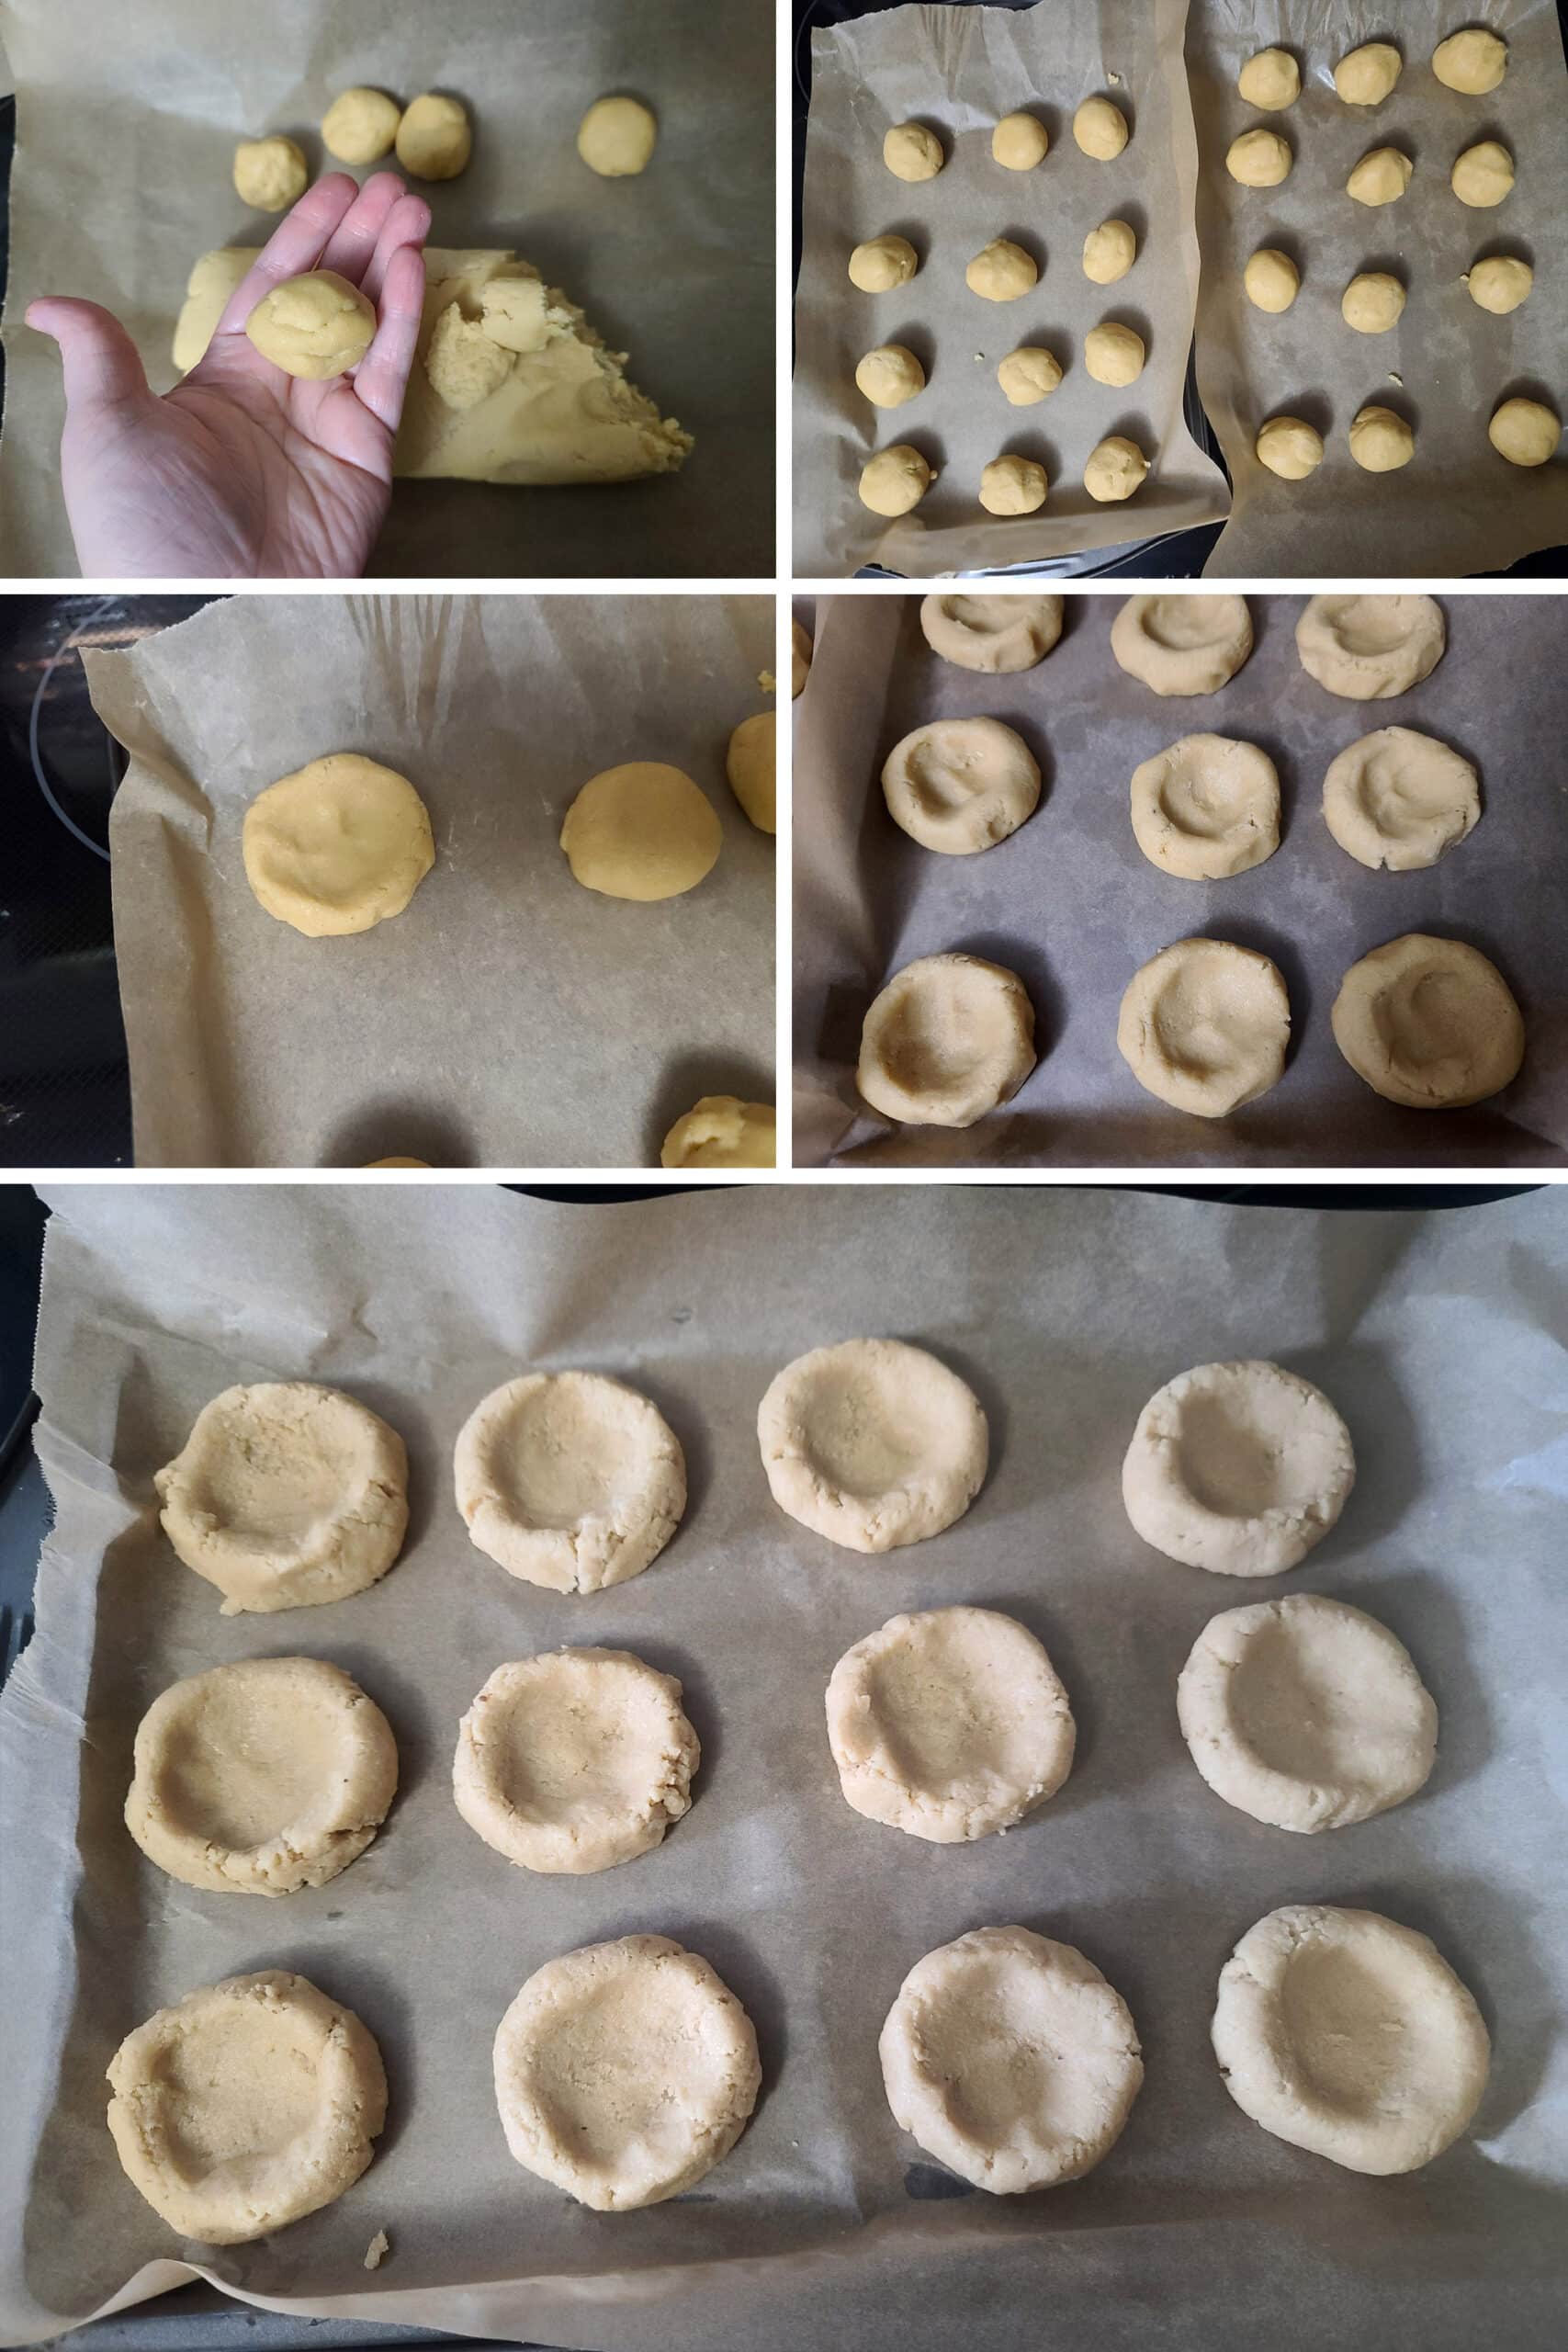 5 part image showing keto cookie dough being rolled into balls and formed into little pie shell shaped cookies.